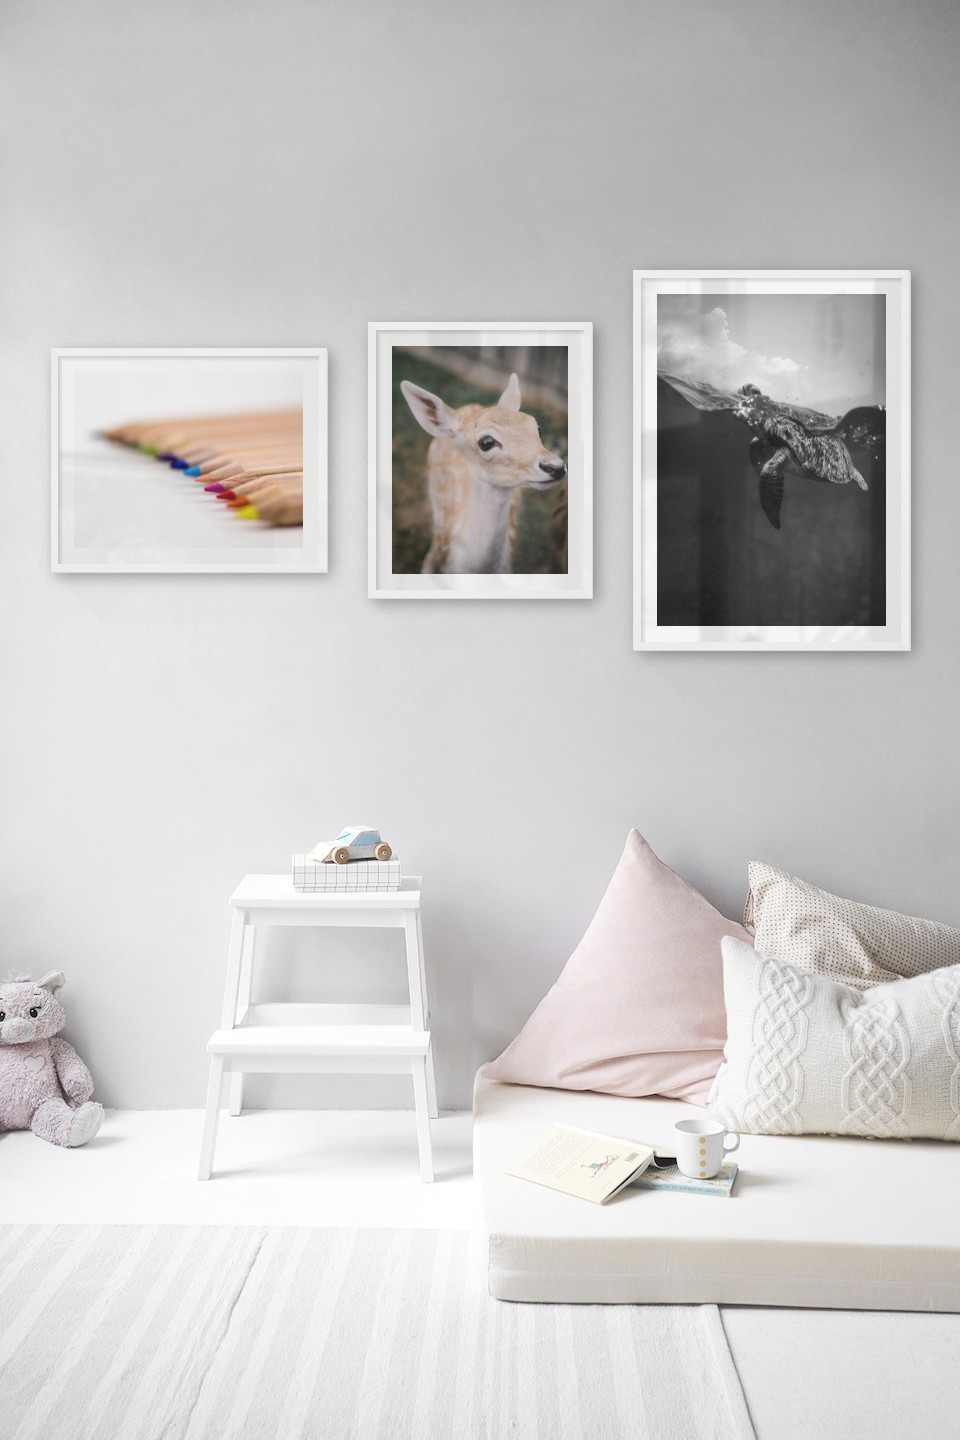 Gallery wall with picture frames in white in sizes 40x50 and 50x70 with prints "Pencils in different colors", "Deer" and "Turtle"